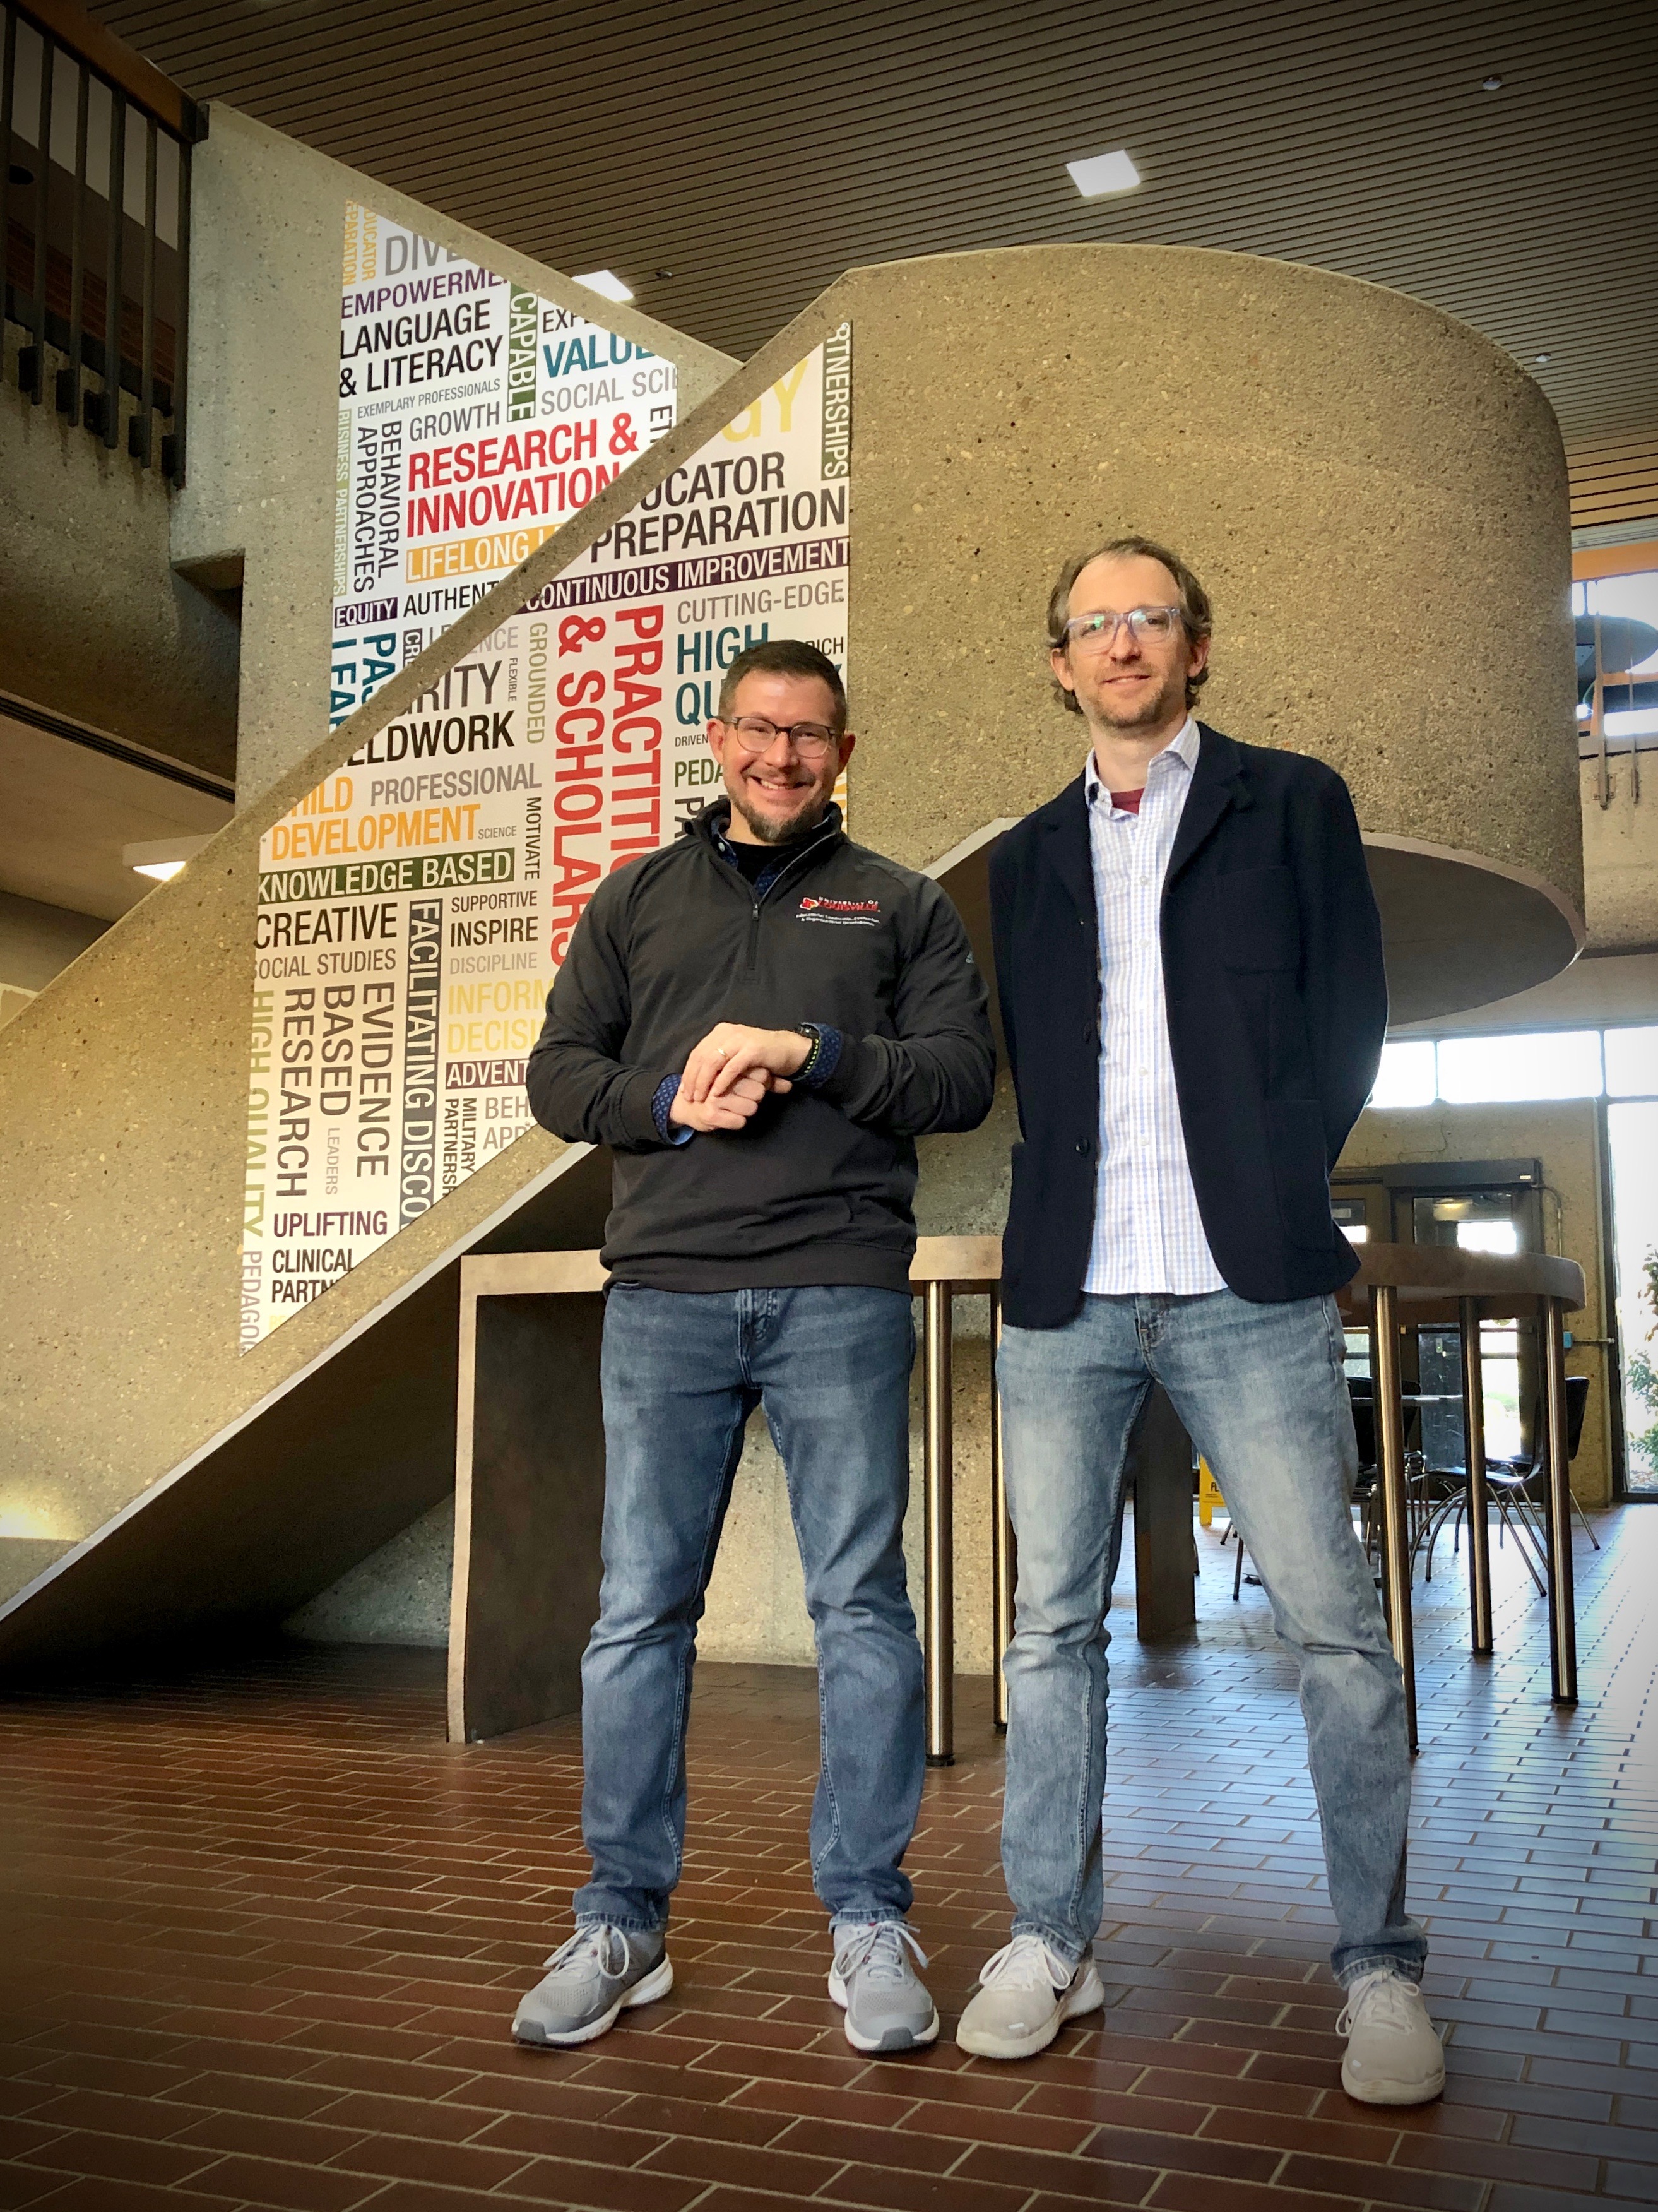 UofL researcher Brad Shuck (left) and entrepreneur Charley Miller (right) in the CEHD atrium